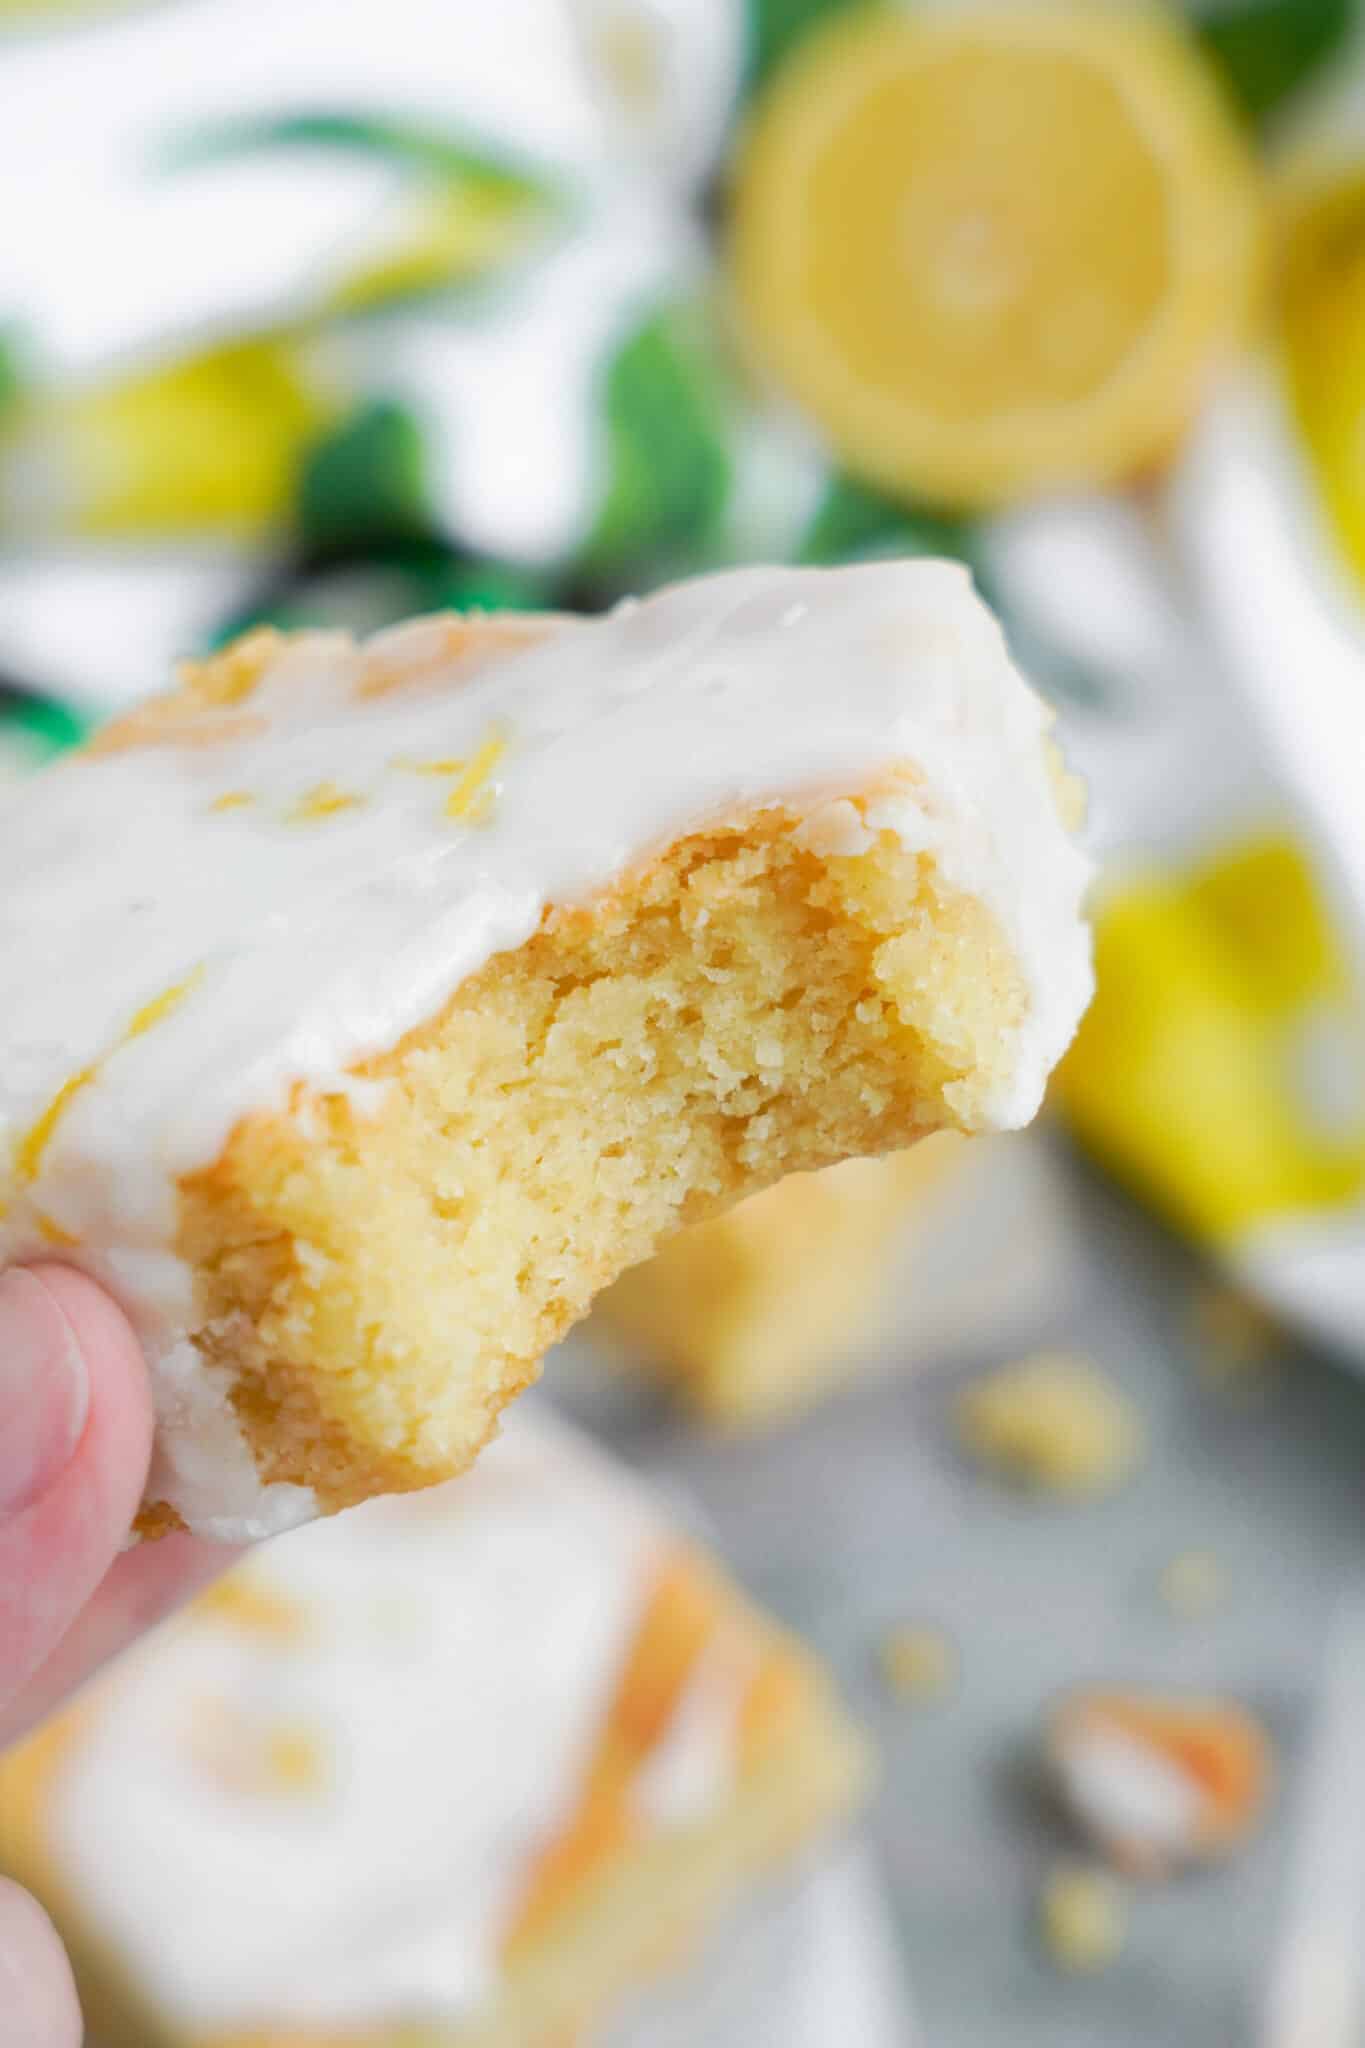 A hand holding the Lemon Cookie Bars.